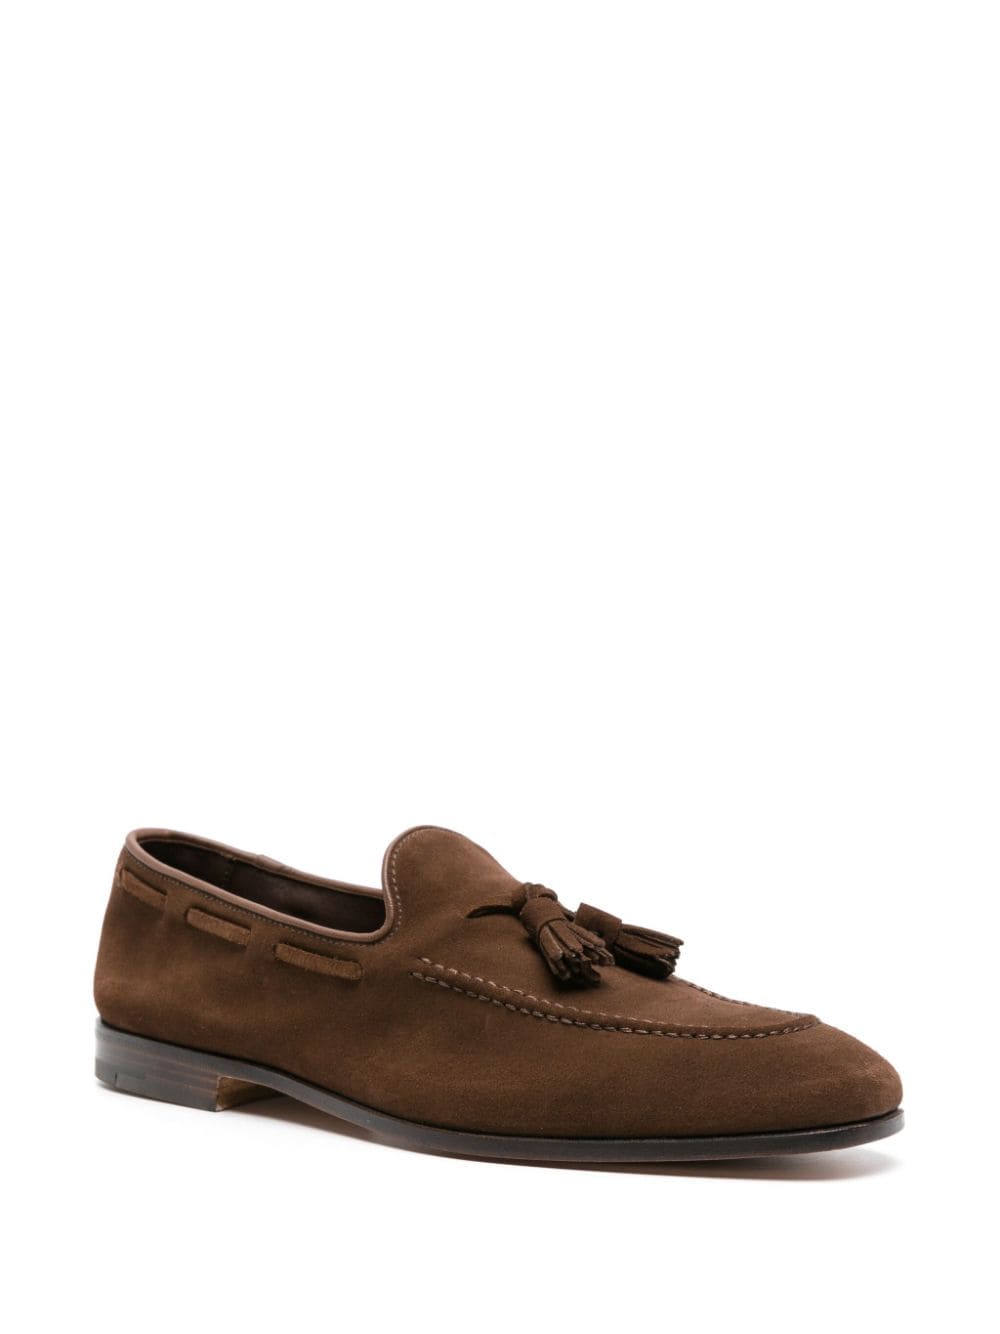 Church's tassel-detail suede loafers - Bruin